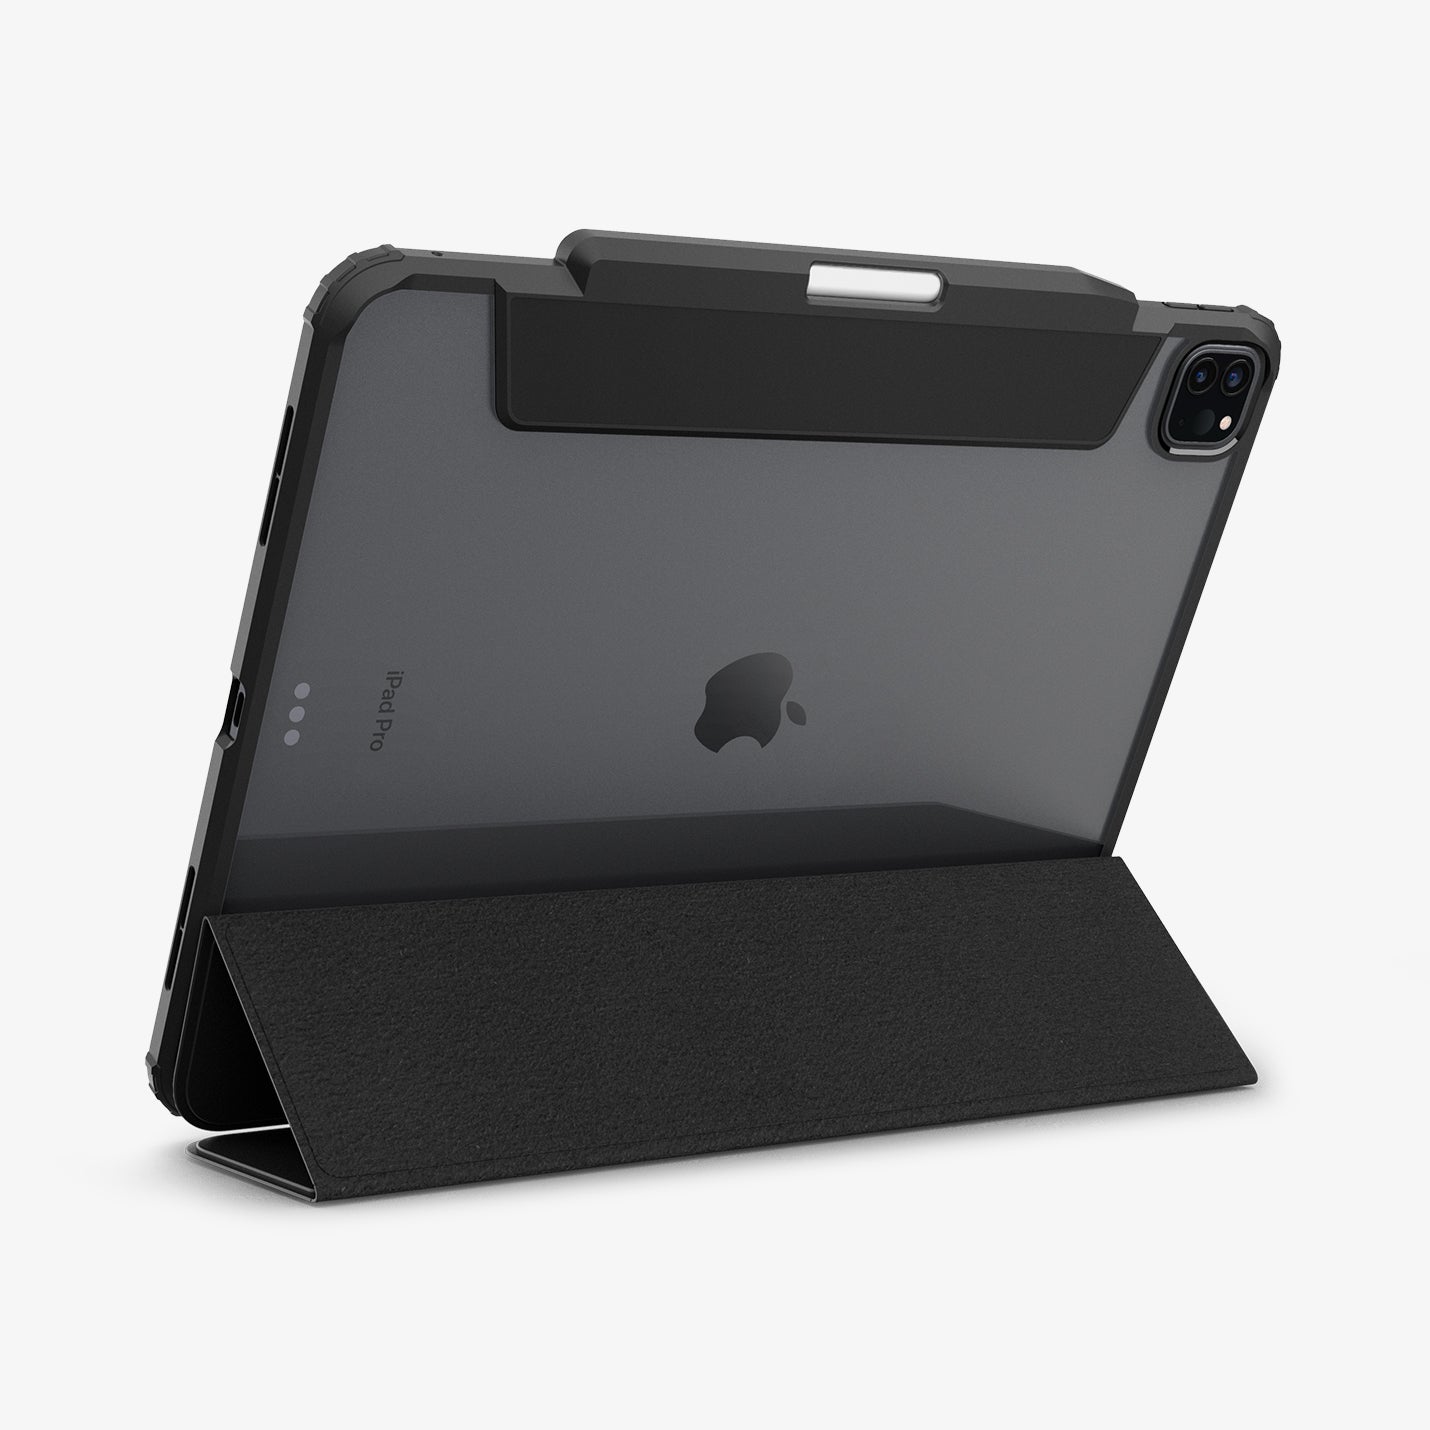 ACS07006 - iPad Pro 12.9-inch Case Ultra Hybrid Pro in Black showing the back, with front cover folded, propped up behind to serve as a stand with a stylus pen